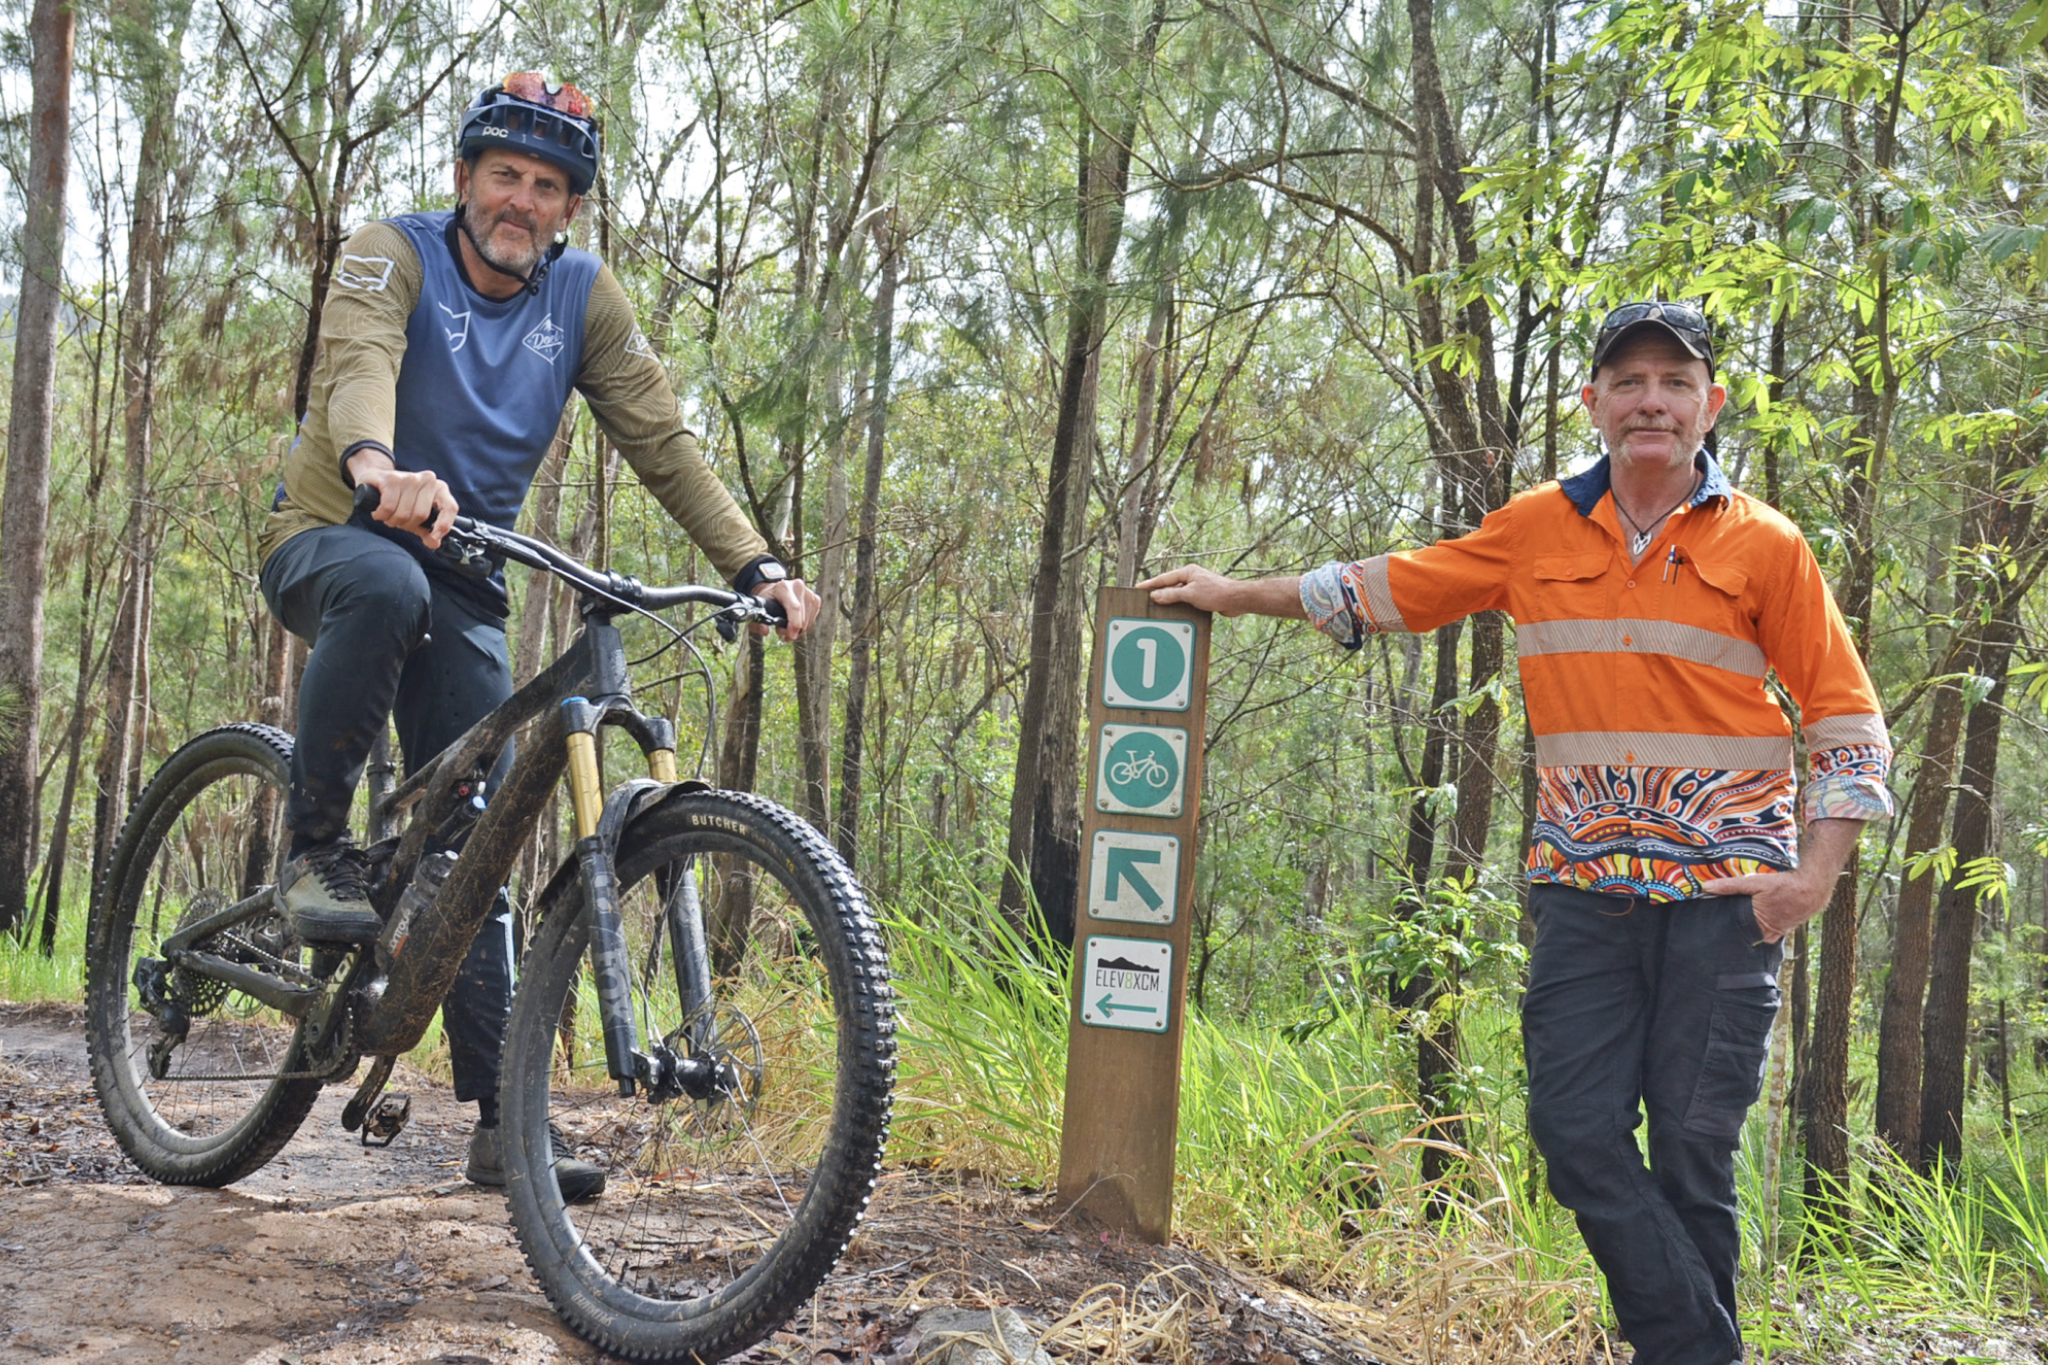 David Prete and Bret Piccone have been maintaining the Atherton Forest Mountain Bike Park for over a decade and are welcoming a new cycling strategy that will help put the trails on the map.